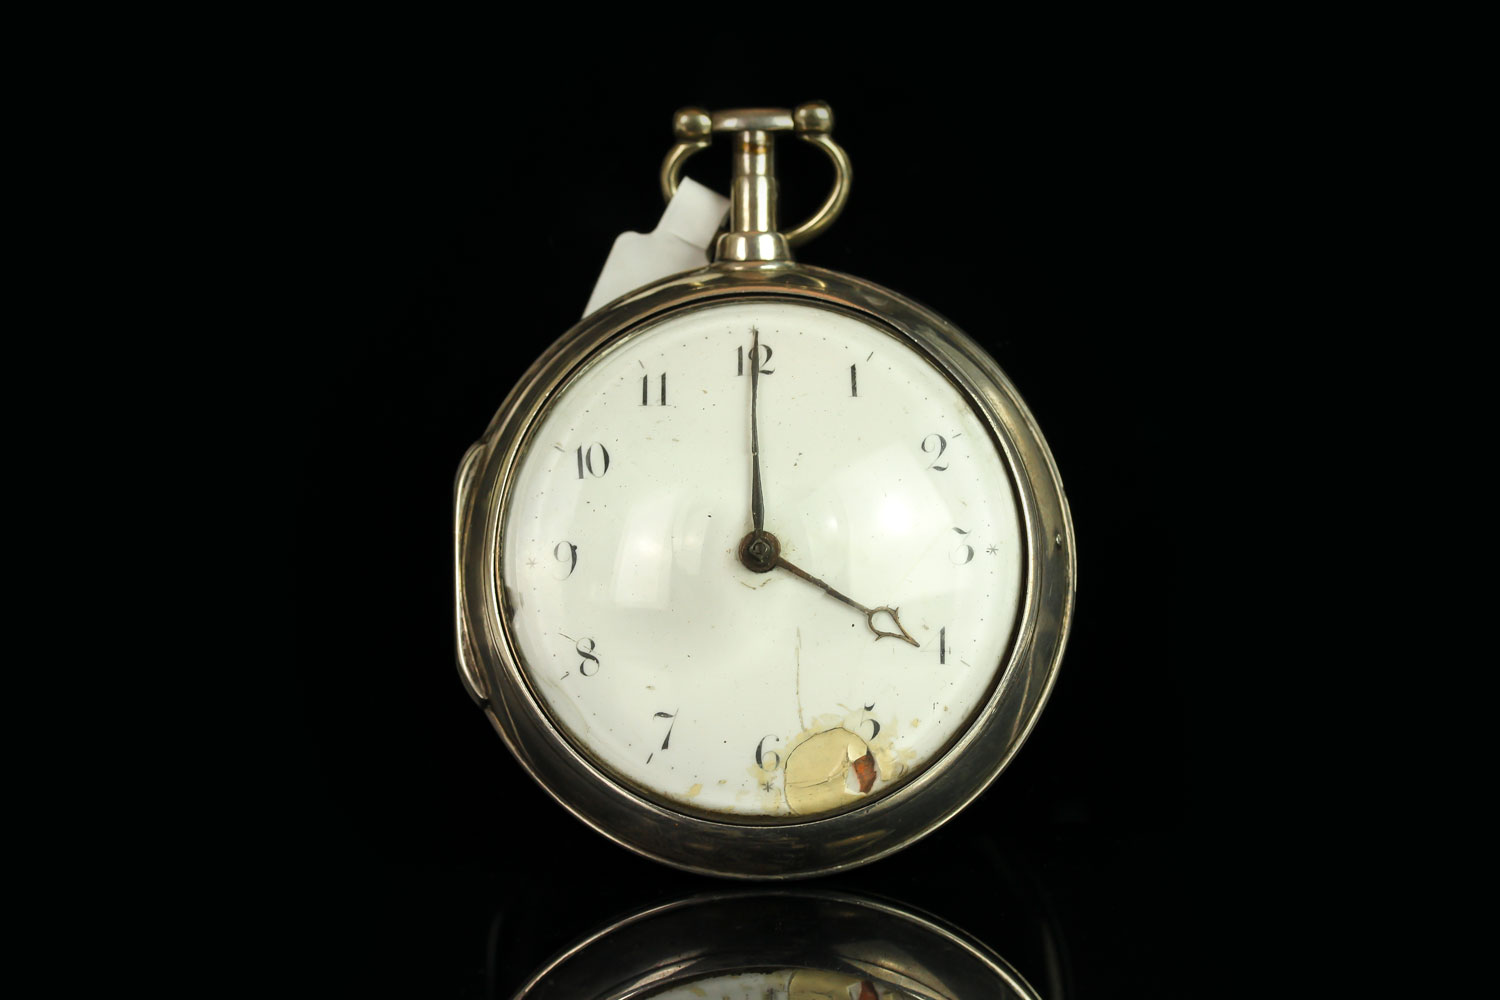 SILVER OPEN FACED POCKET WATCH, round, white porcelain dial with black hands, black arabic markers,